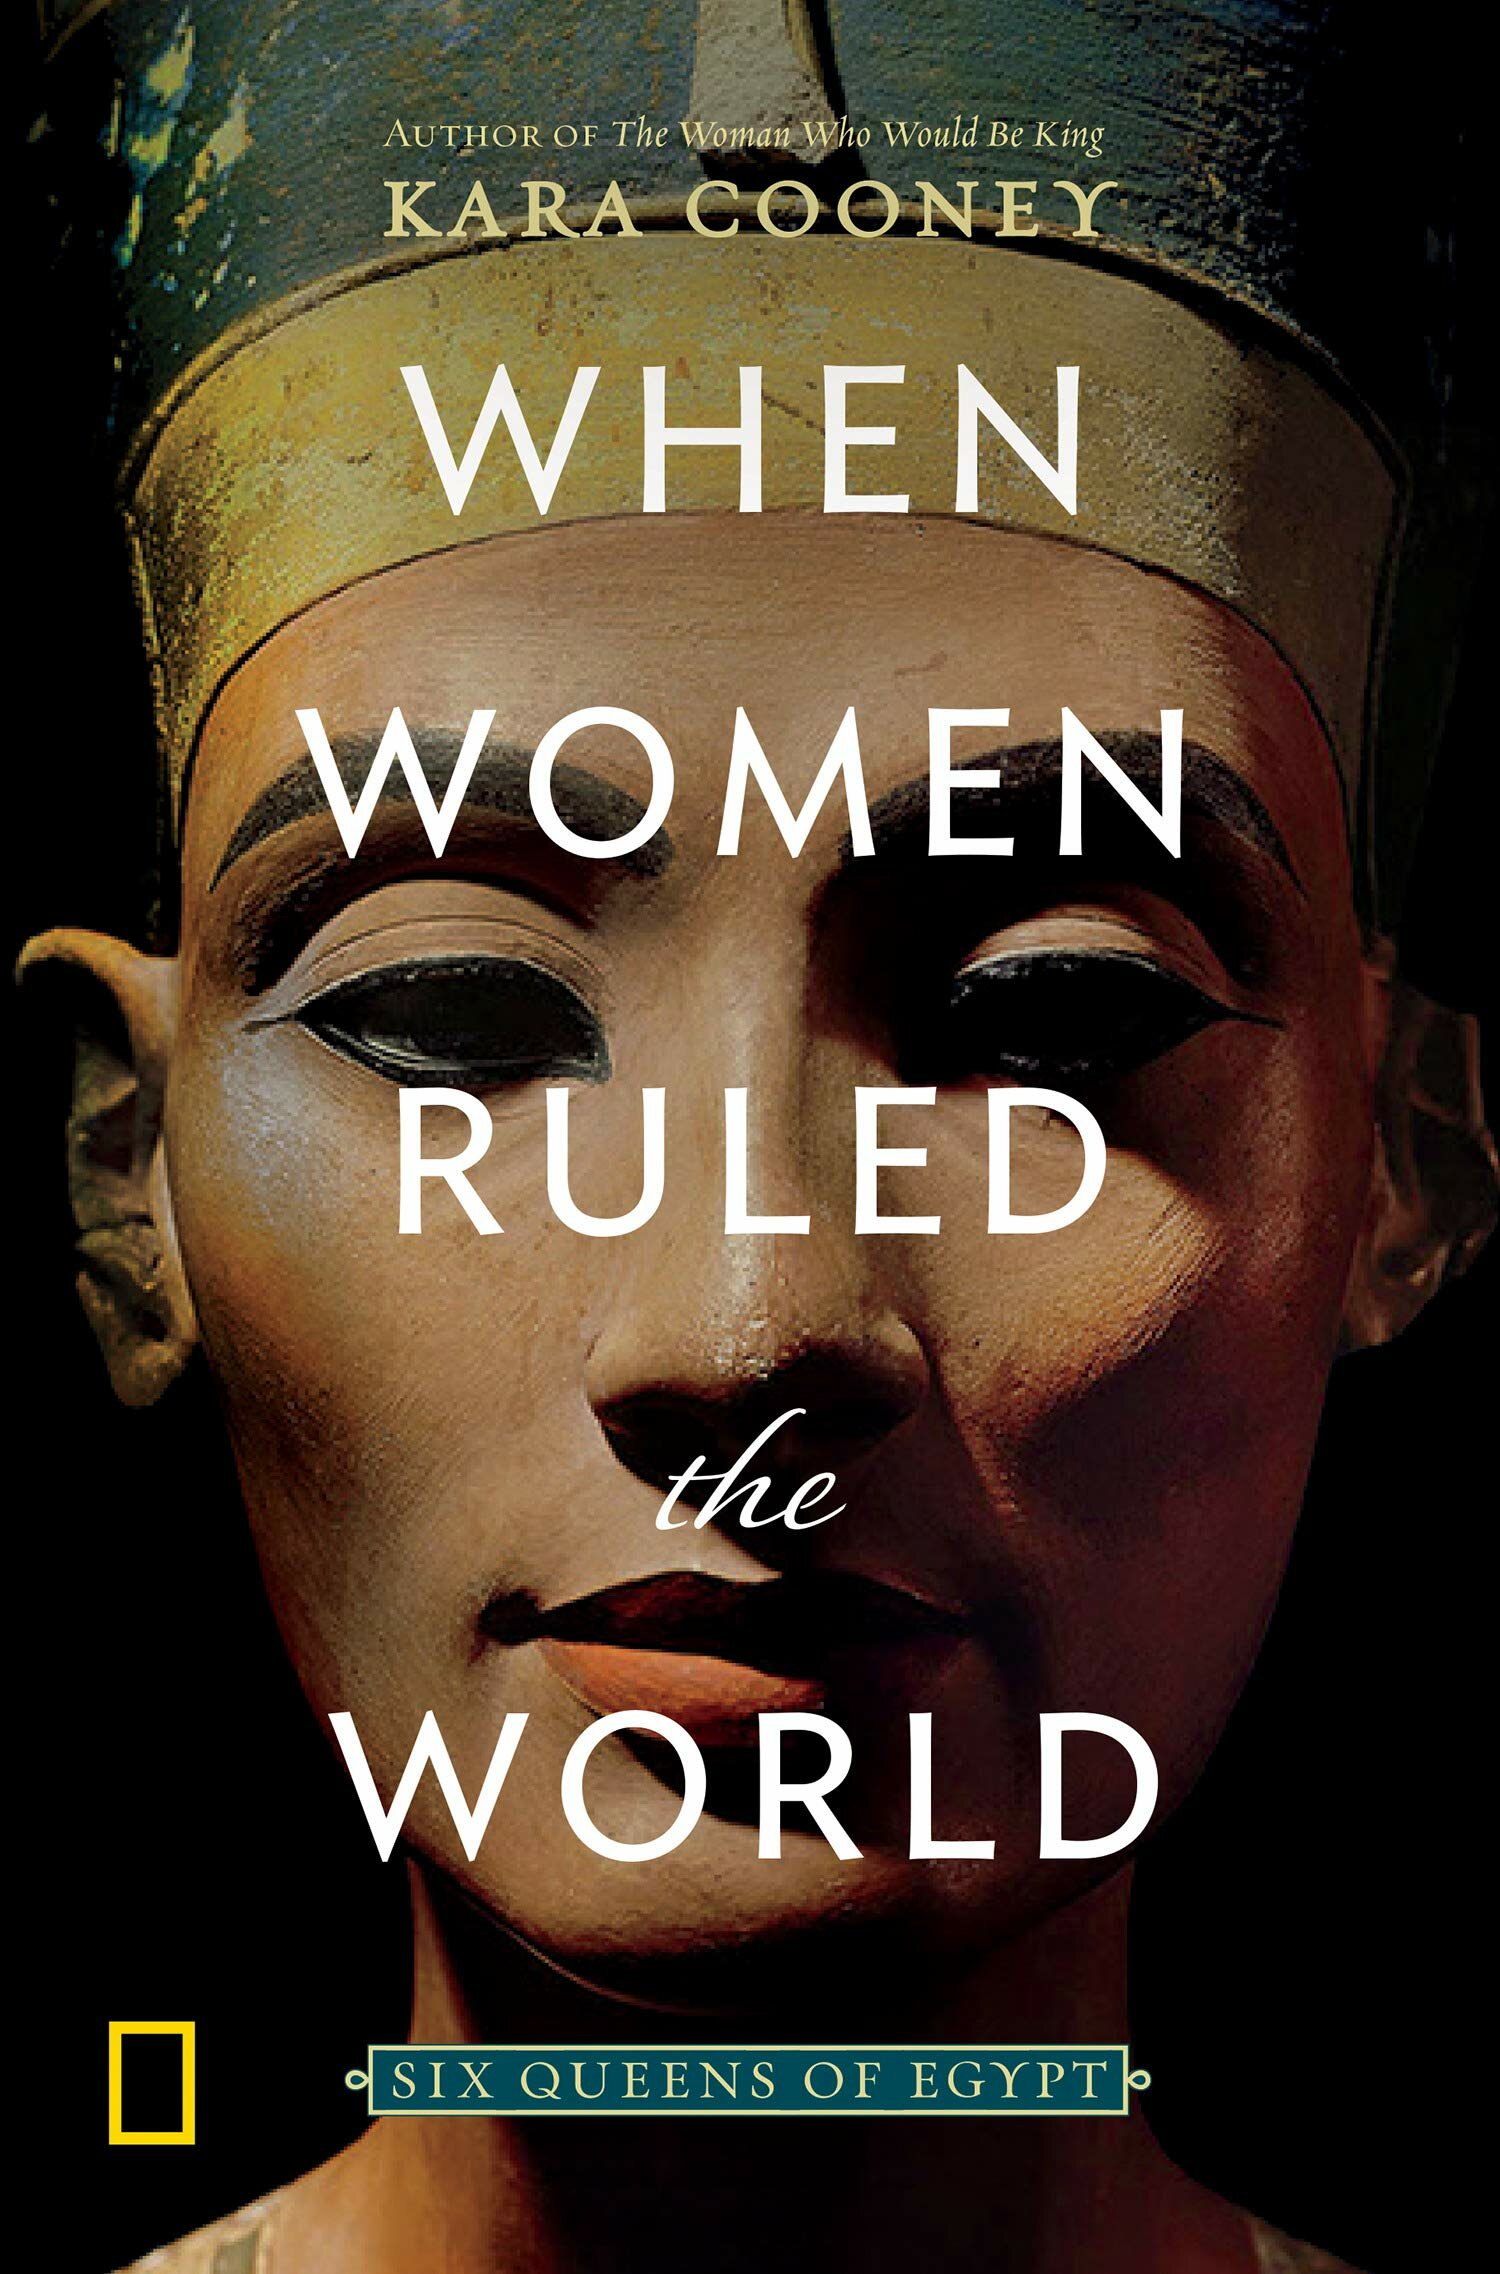 the parallels of female power in ancient egypt and modern times